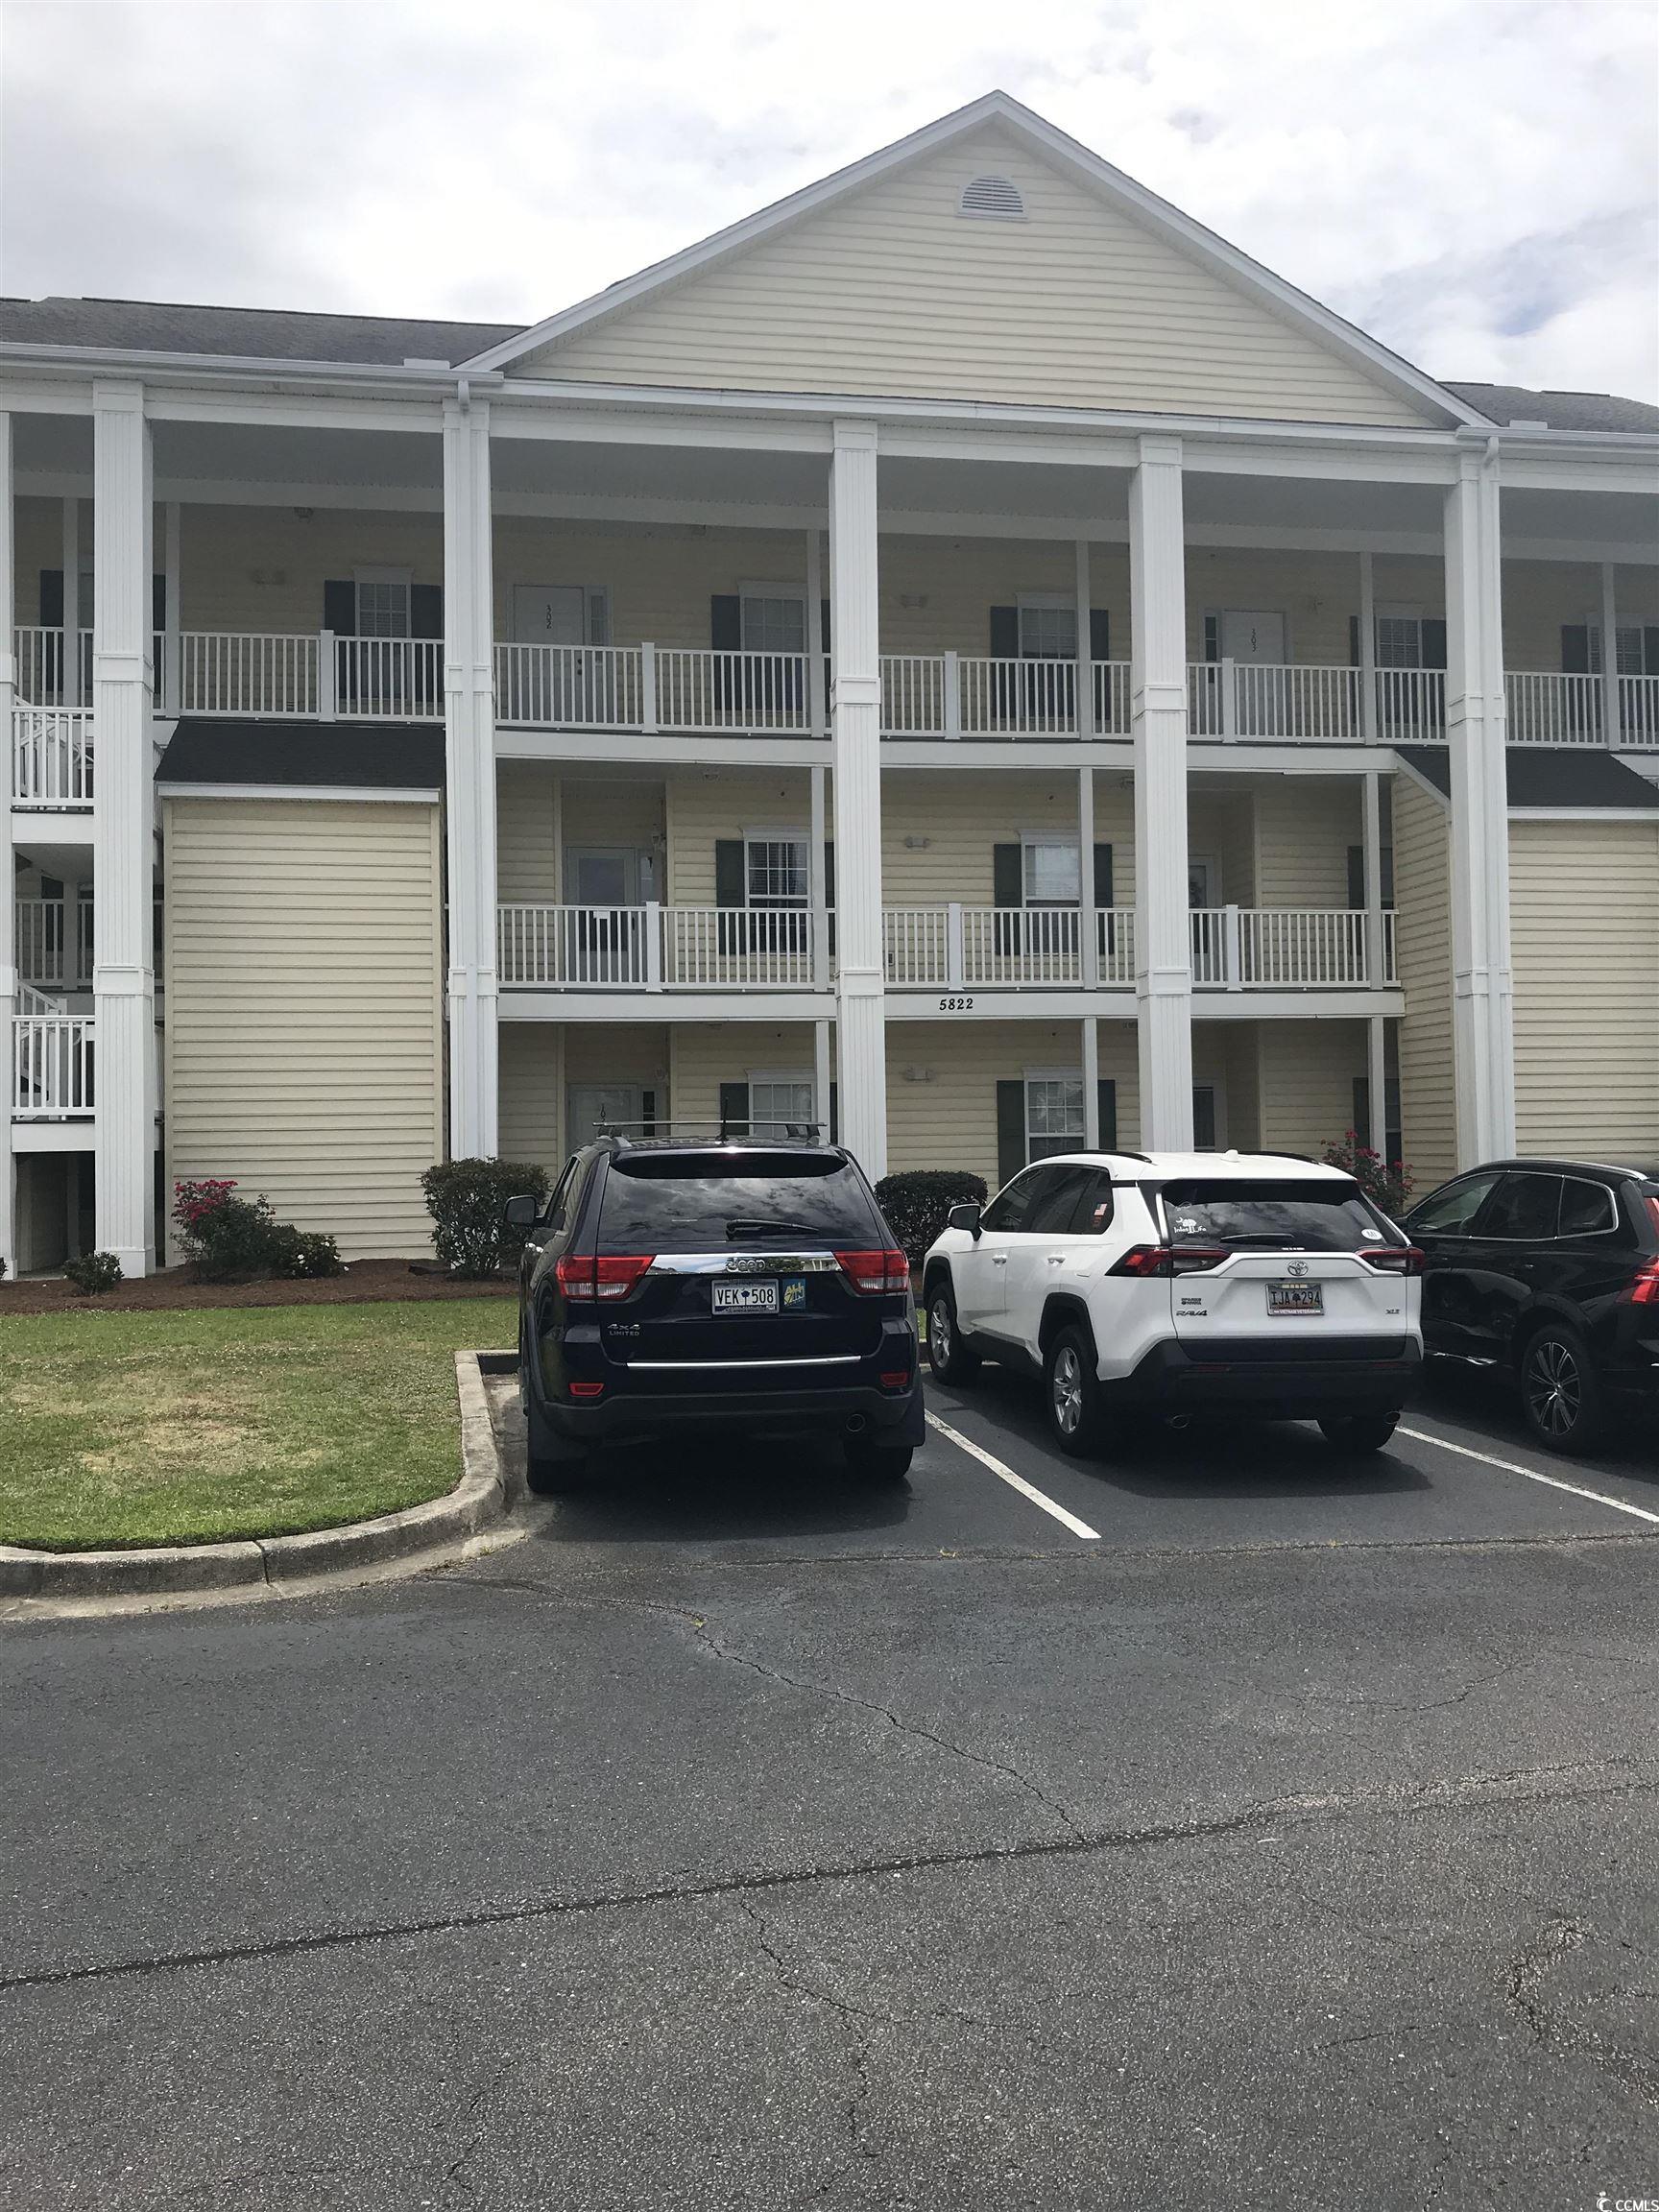 rent includes all utilities!  fully furnished 3 bedroom 2 full bath unit ready for immediate occupancy.  rent includes:  electric in unit, cable/wife, water/sewer and trash pick up.  washer and dryer and all appliances included.  great amenities.